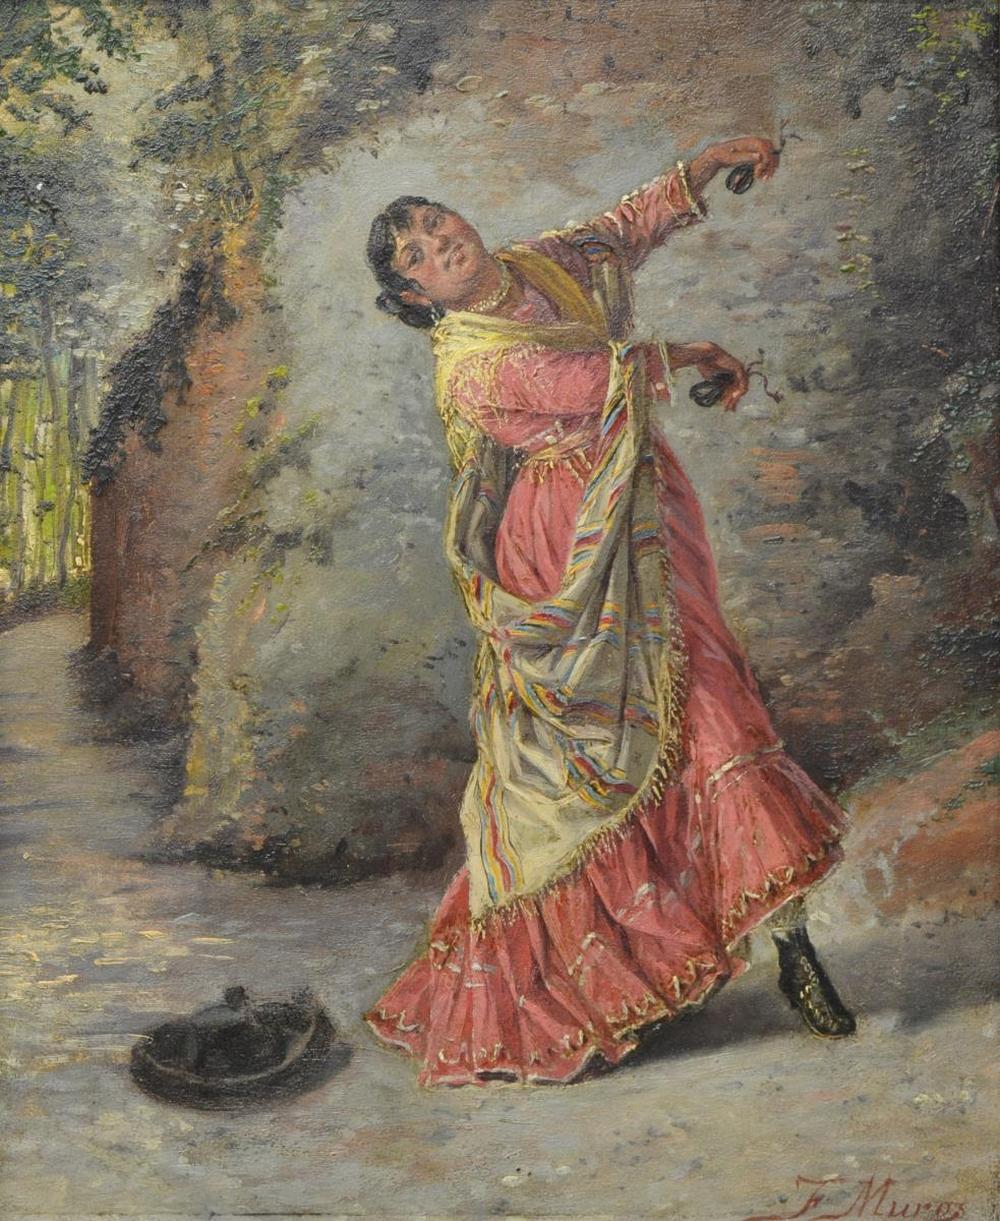 Framed oil on wood panel painting, Flamenco Dancer with Castanets, signed lower right F. Muros (Francisco Muros Ubeda, Spanish, 1836-1917).